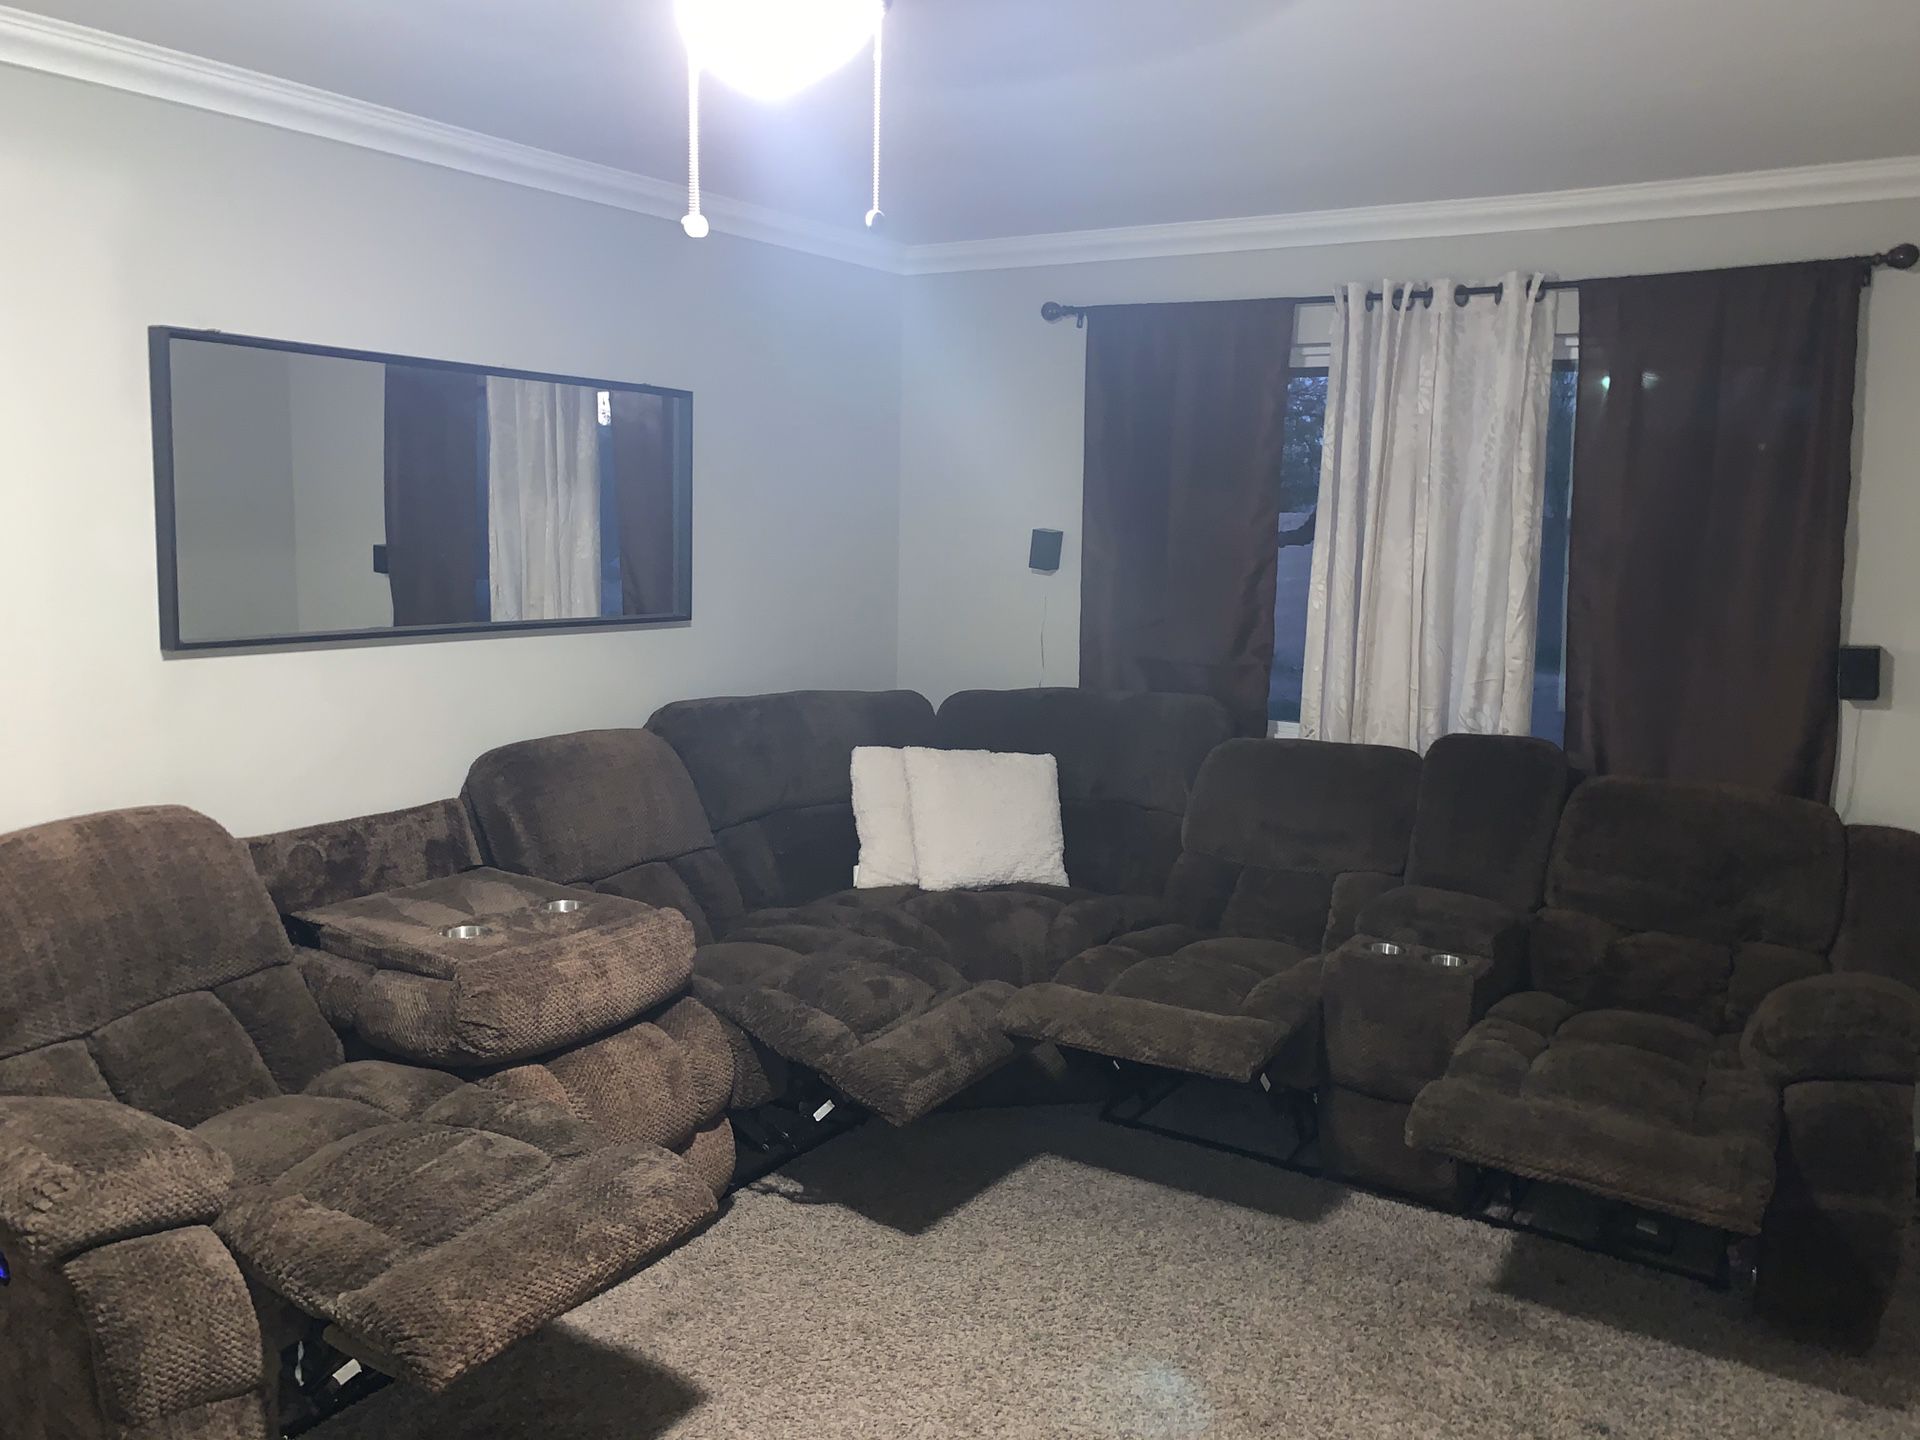 7 Piece Sectional Couch